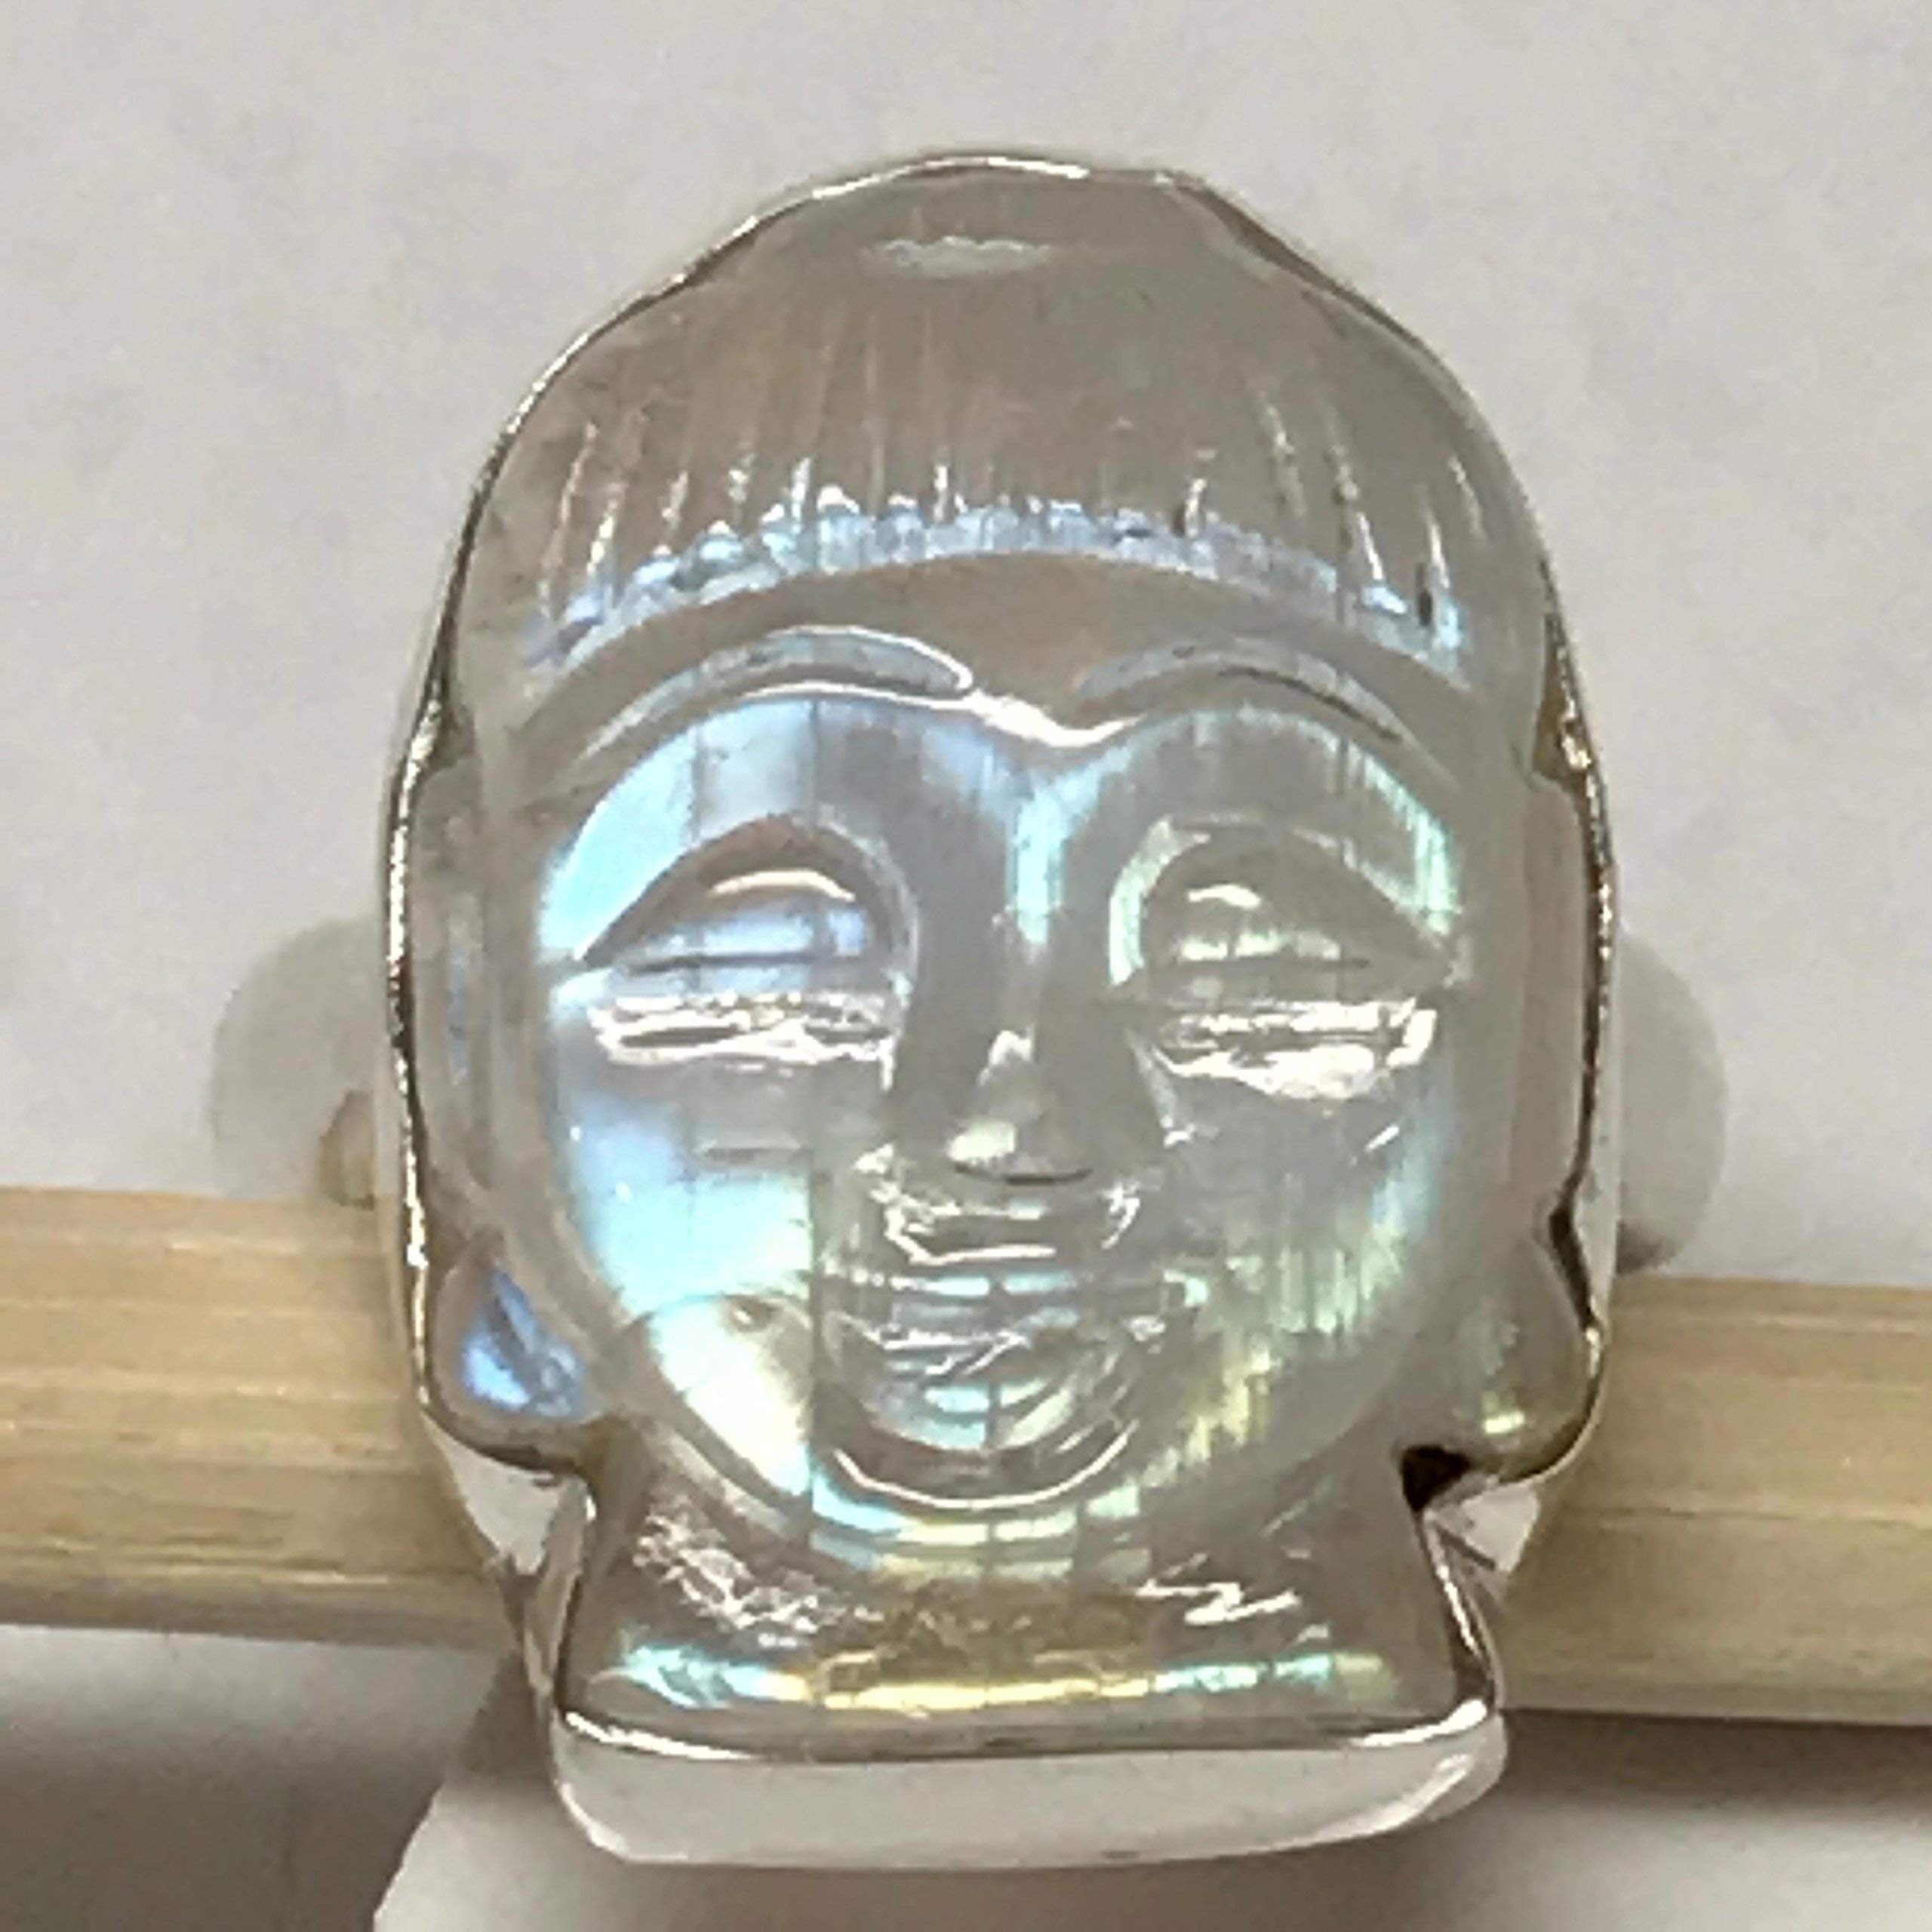 Genuine Rainbow Moonstone 925 Sterling Silver Hand-carved Buddha Meditate Ring Size 5.5, 6.75 - Natural Rocks by Kala